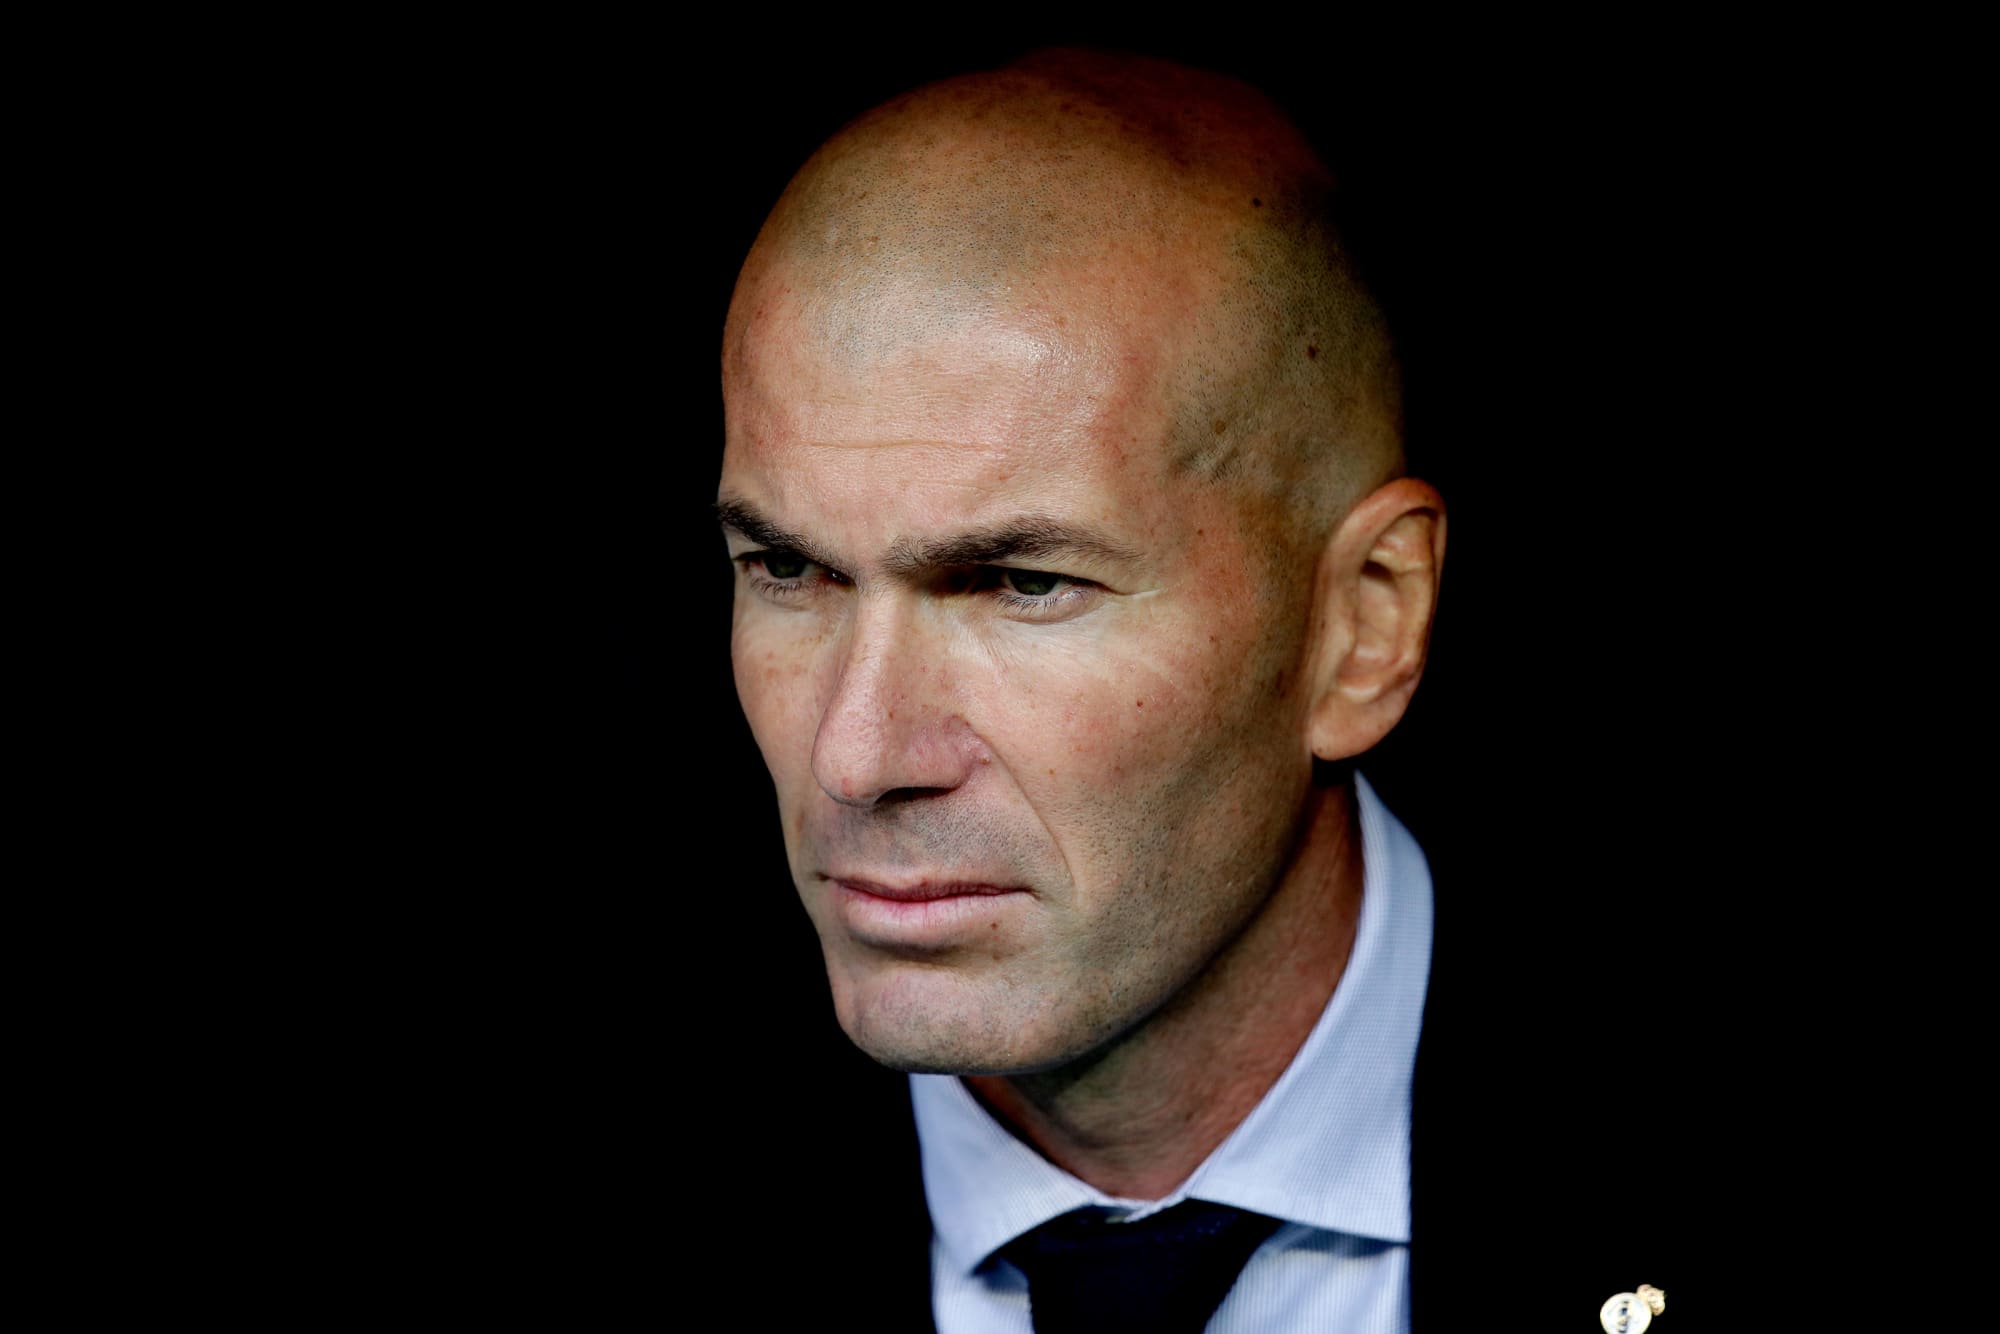 Real Madrid: Why Zinedine Zidane deserves more time and patience